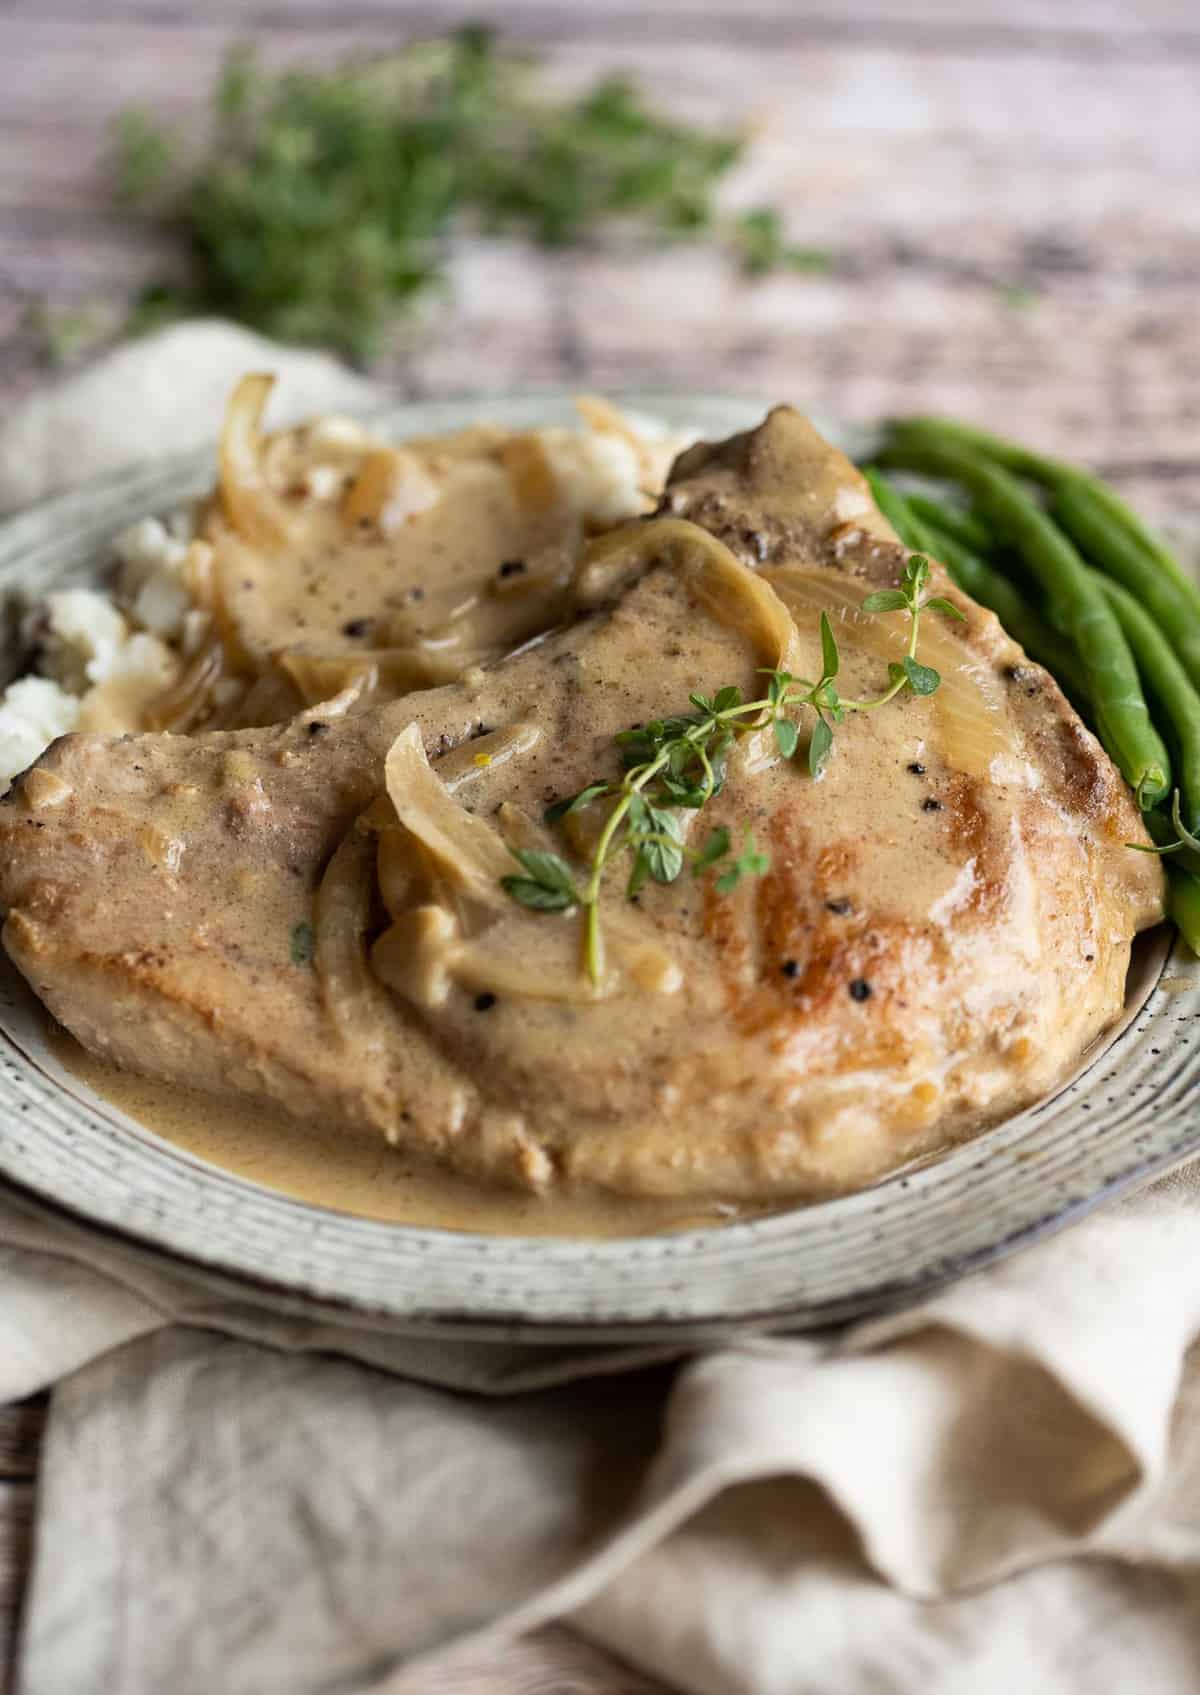 Pork on a plate with mushroom gravy and a side of green beans.